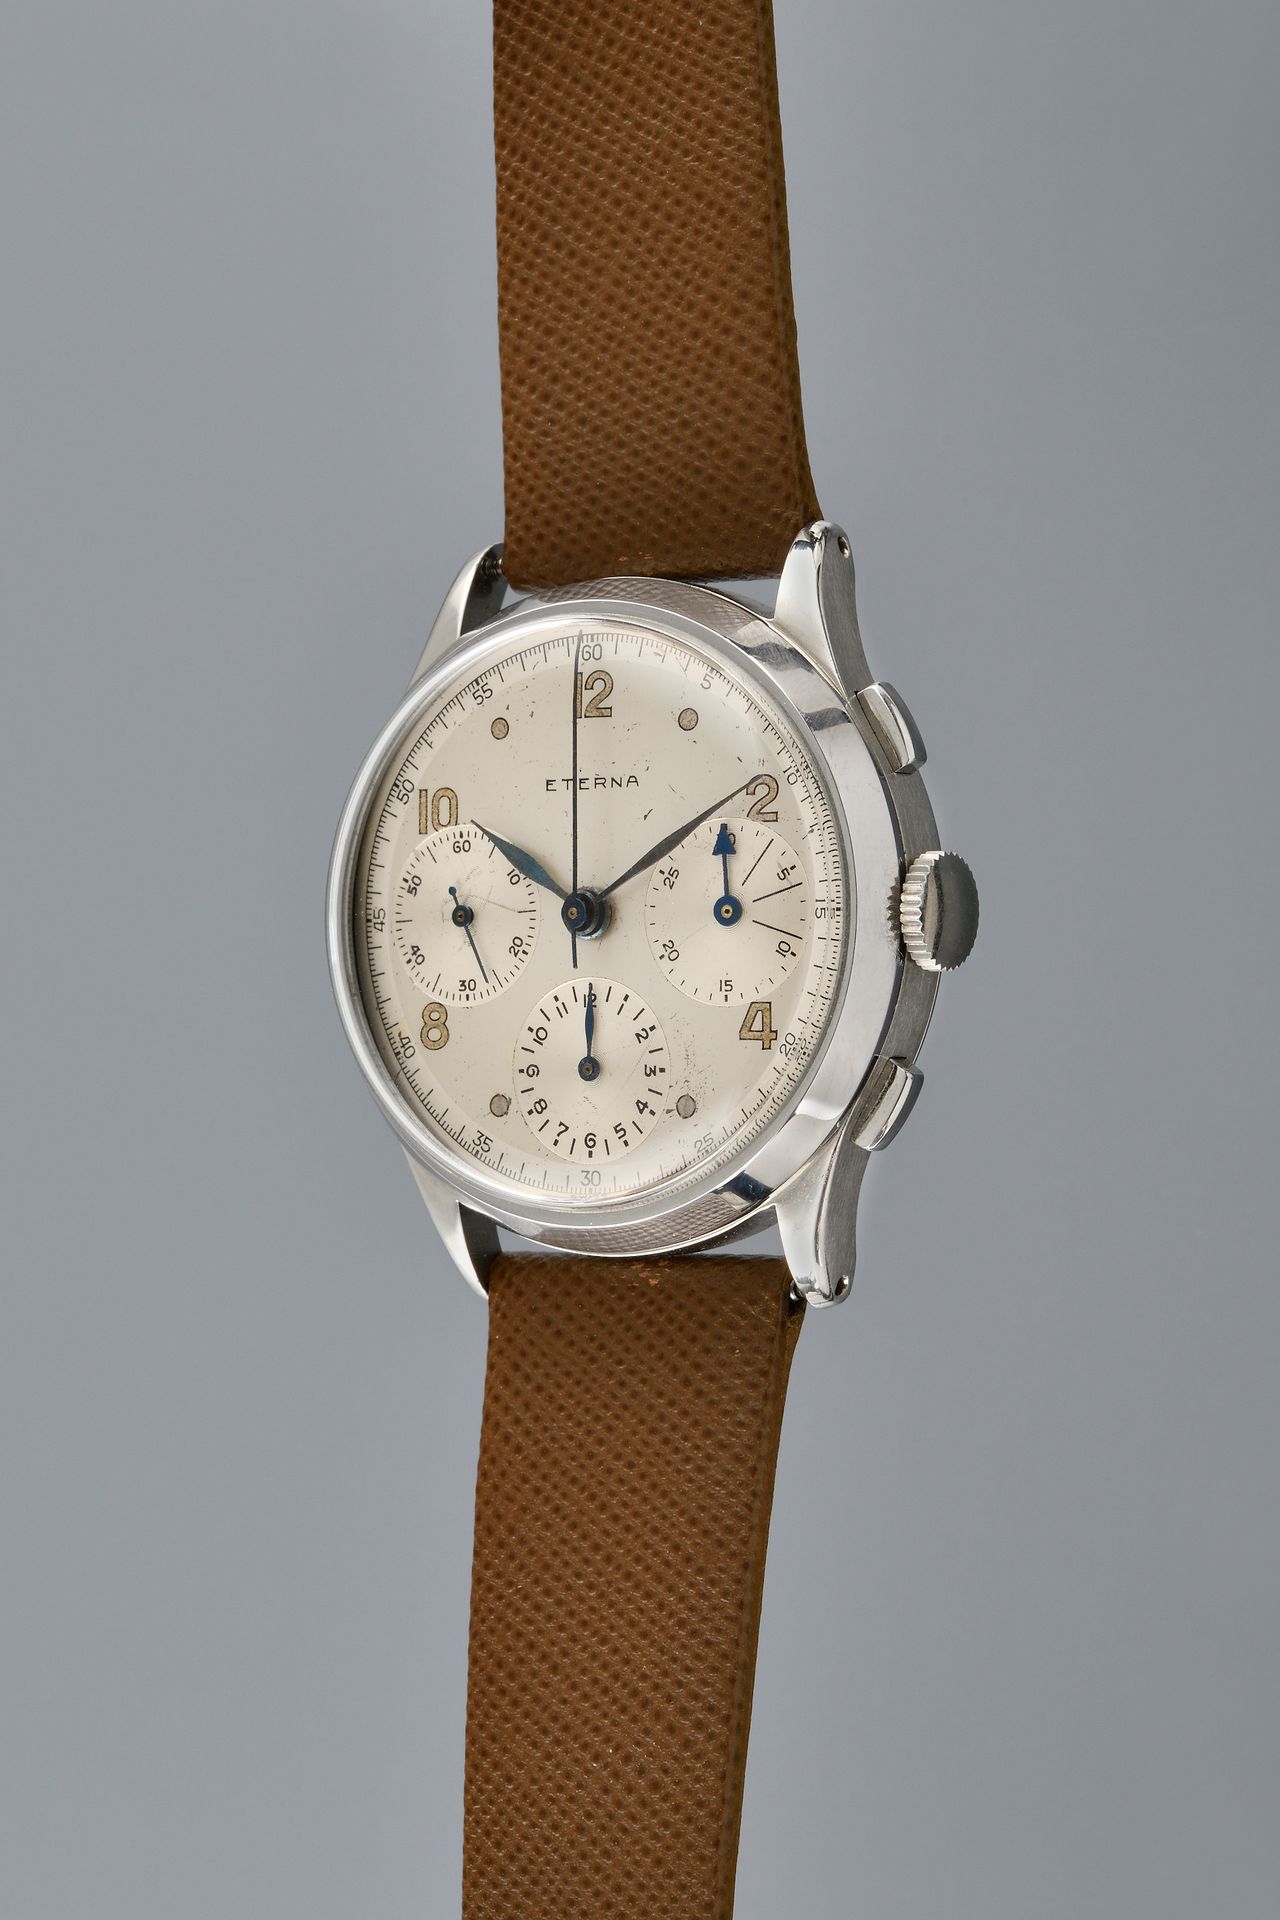 Null ETERNA
Chronograph tri compax.
About: 1950. 
Steel chronograph, signed whit&hellip;